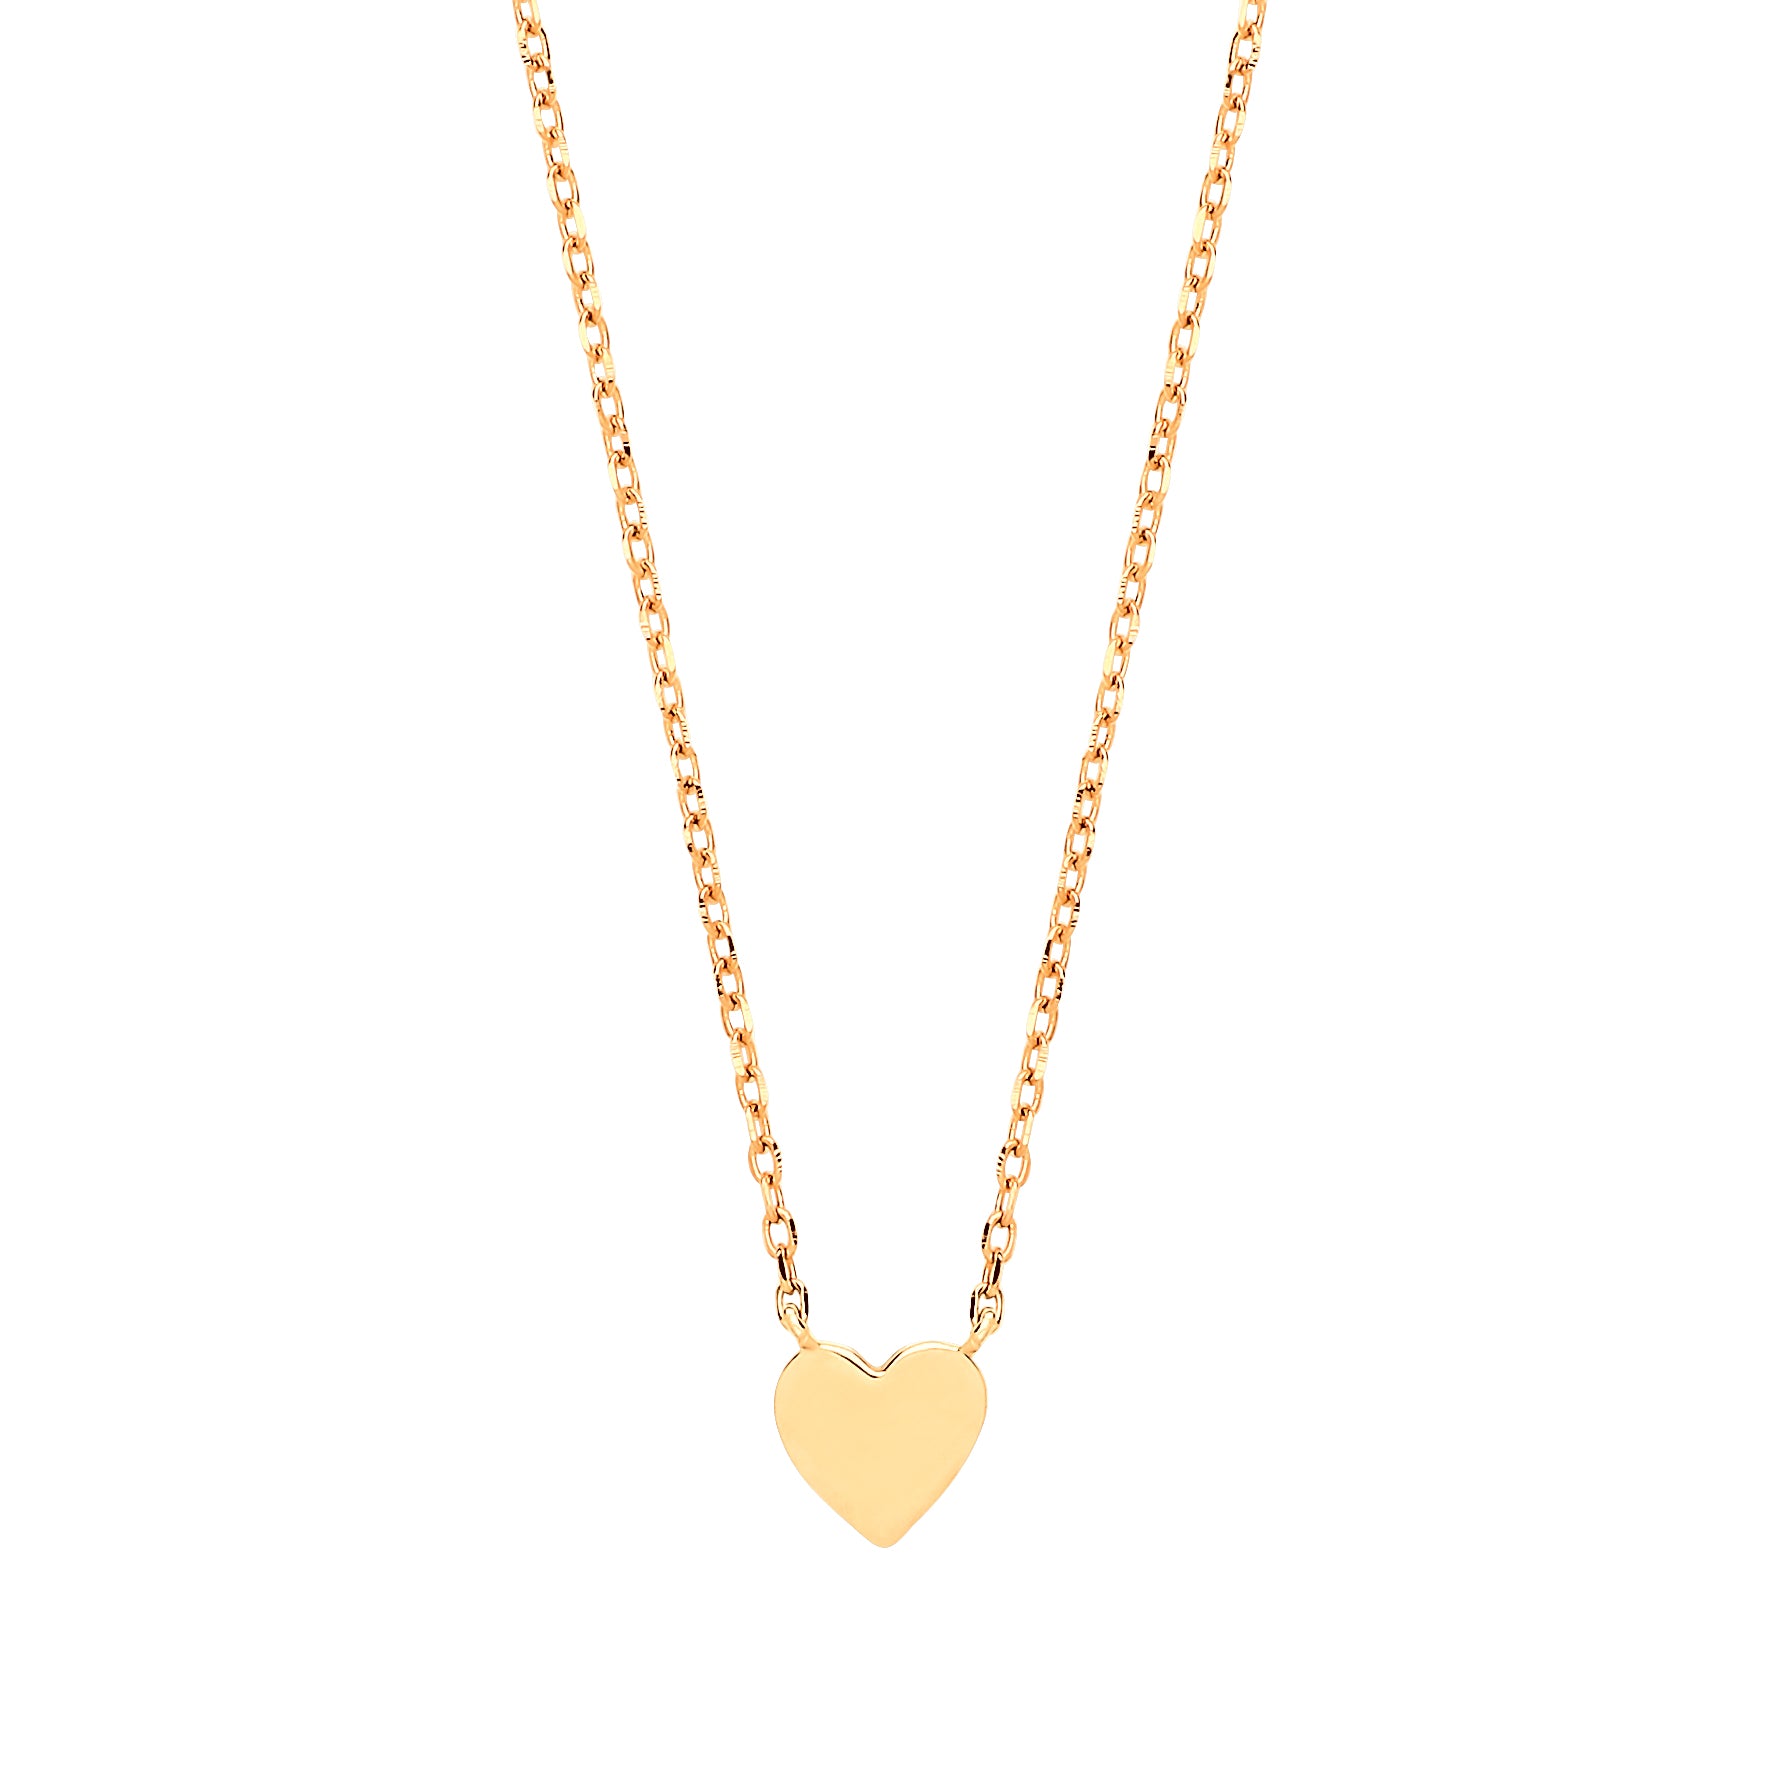 Gilded Silver  Love Heart Charm Necklace 16 inch - GVK277